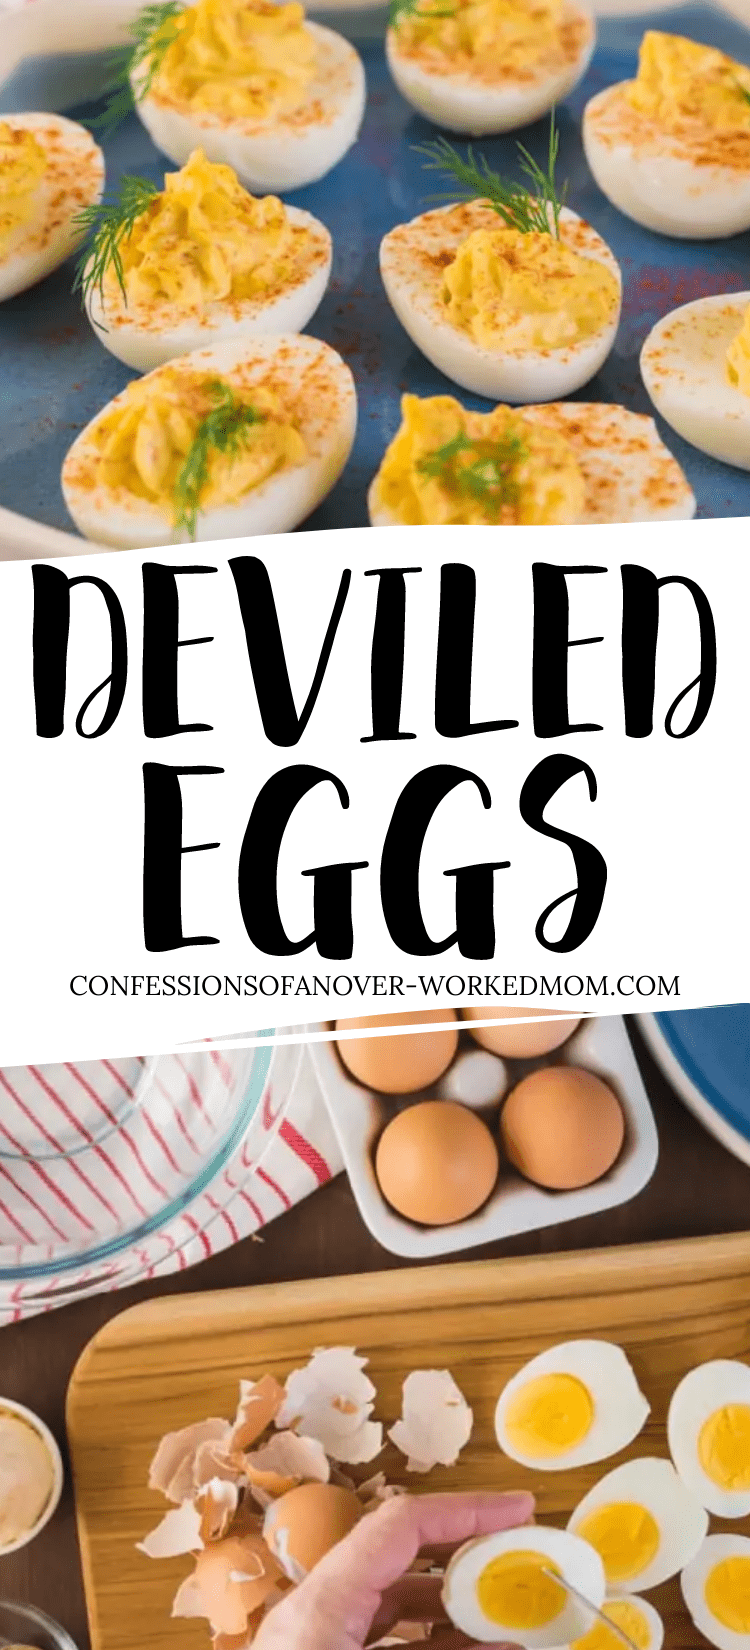 You are going to love my Herbed Deviled Eggs recipe! Get the recipe for Grandma’s deviled eggs that taste just like Ina Garten’s.